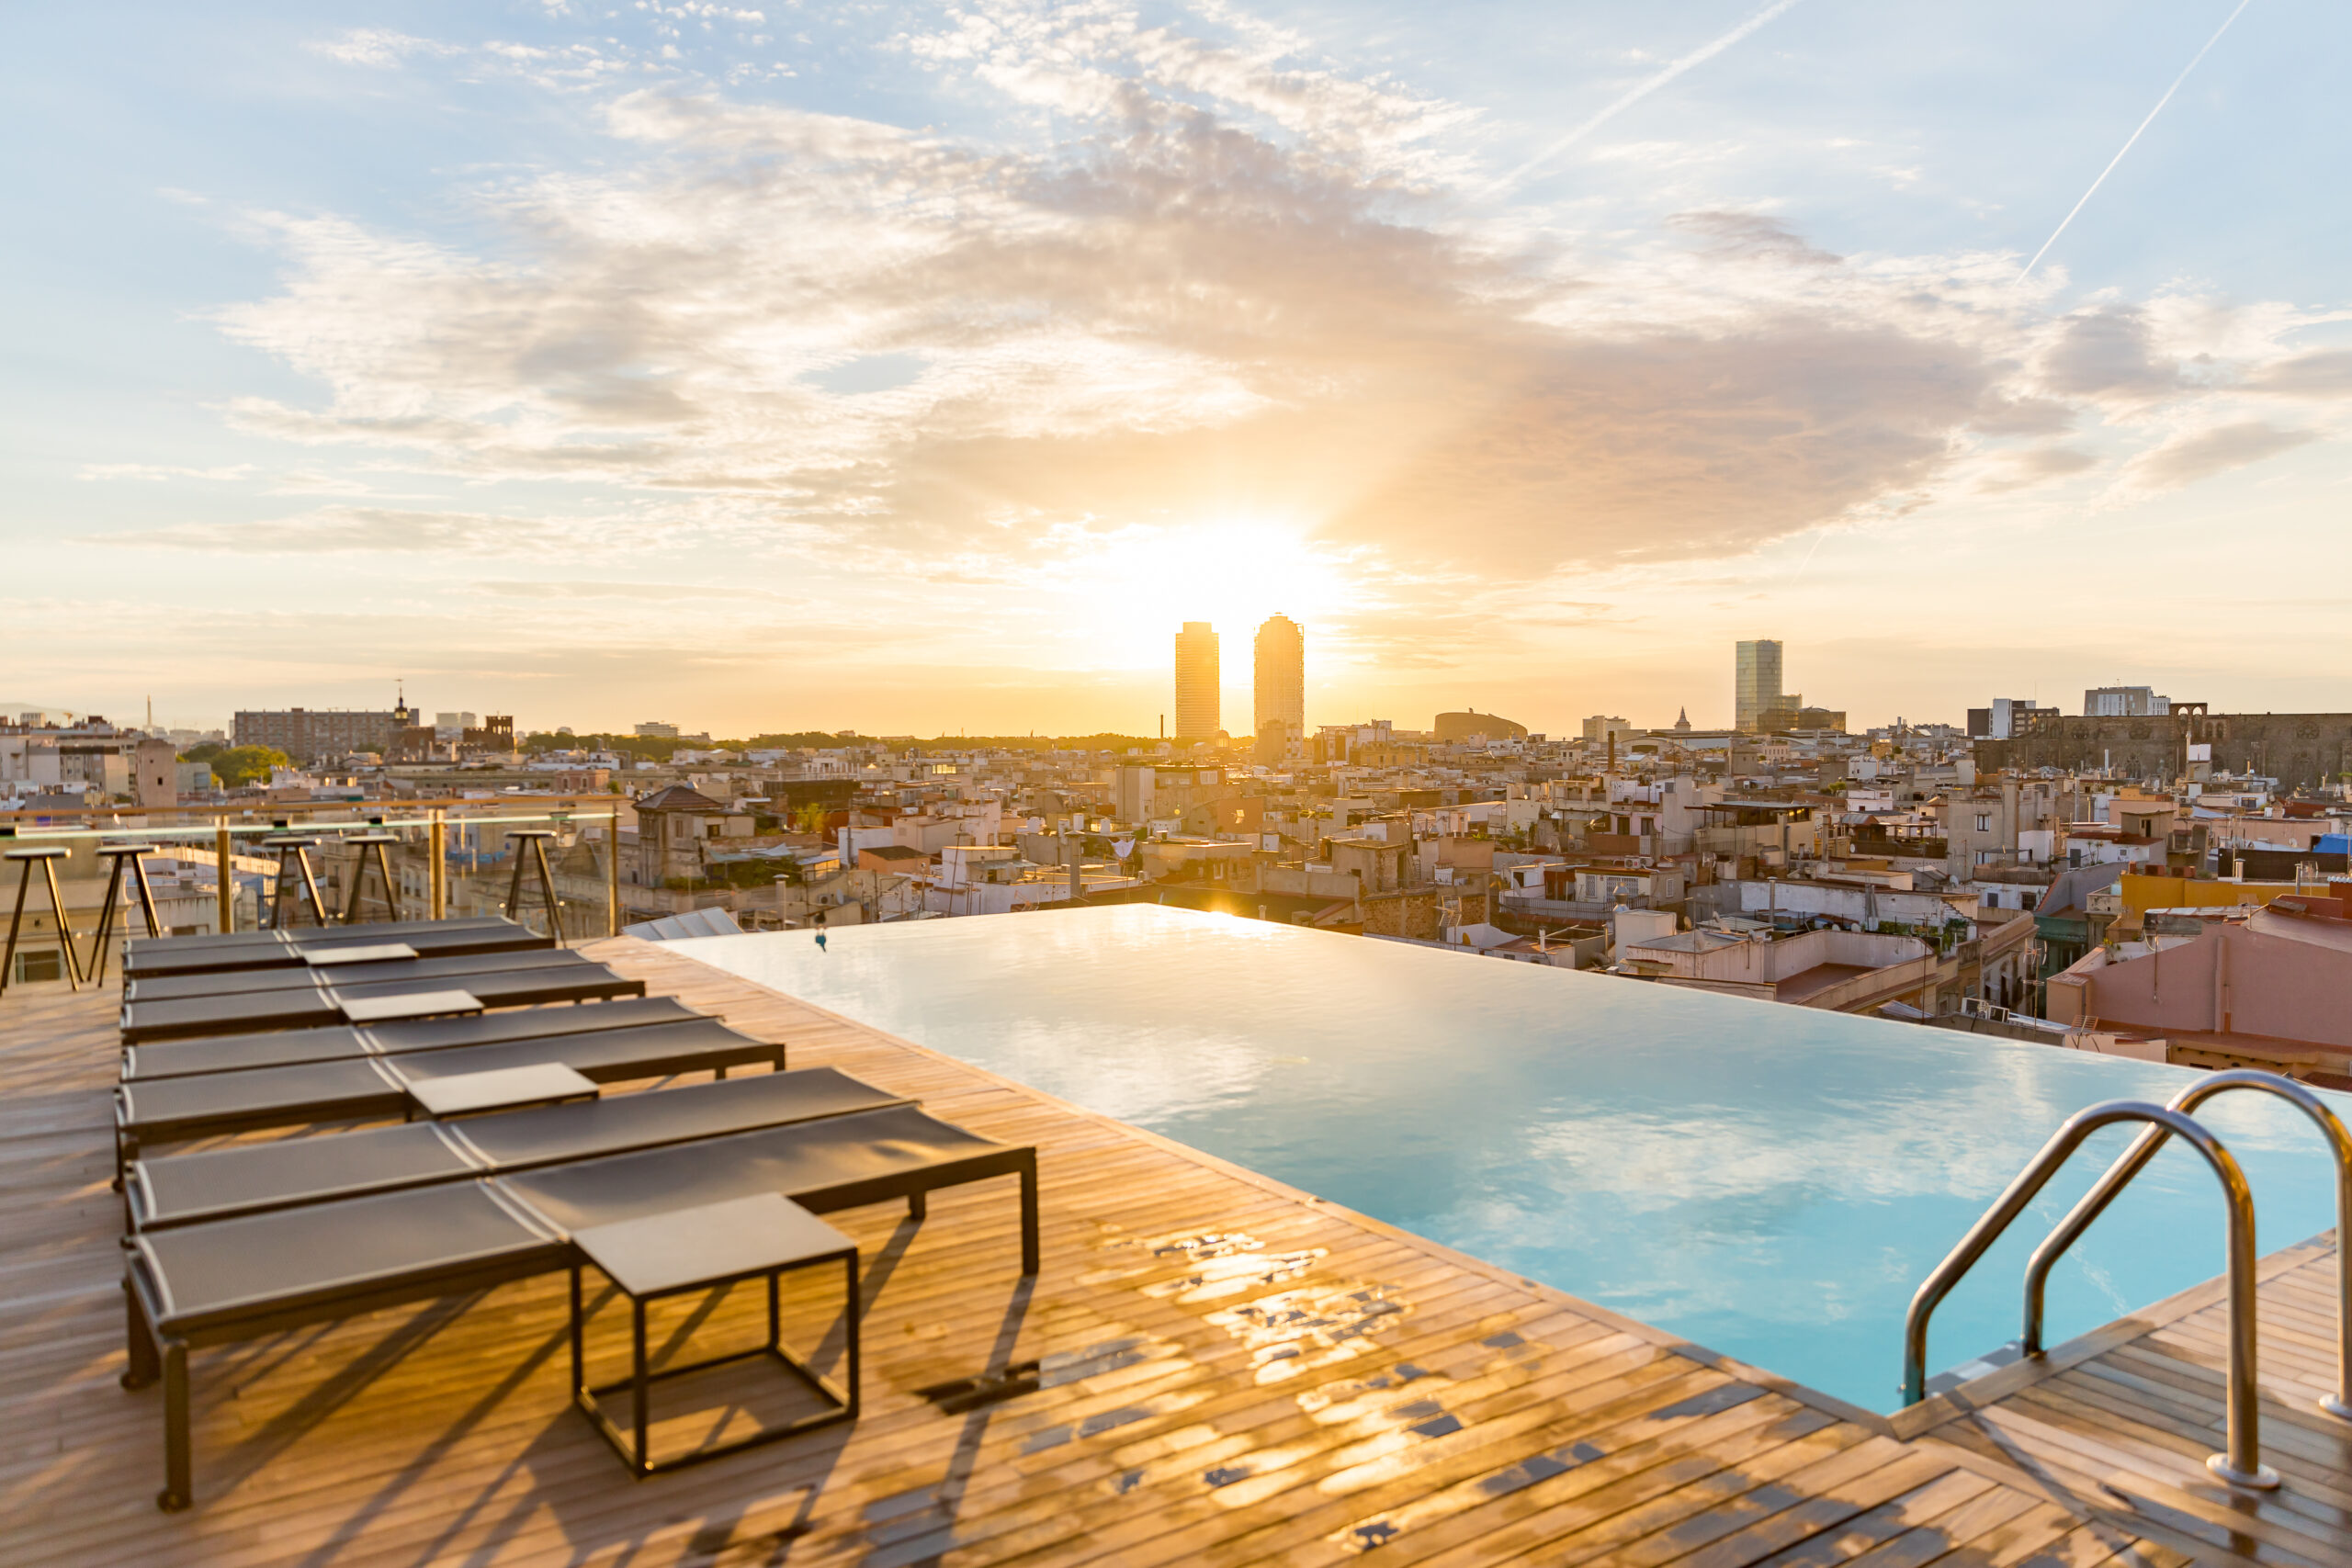 Grand Hotel Central Barcelona: Where Modern Glamour Meets Heritage